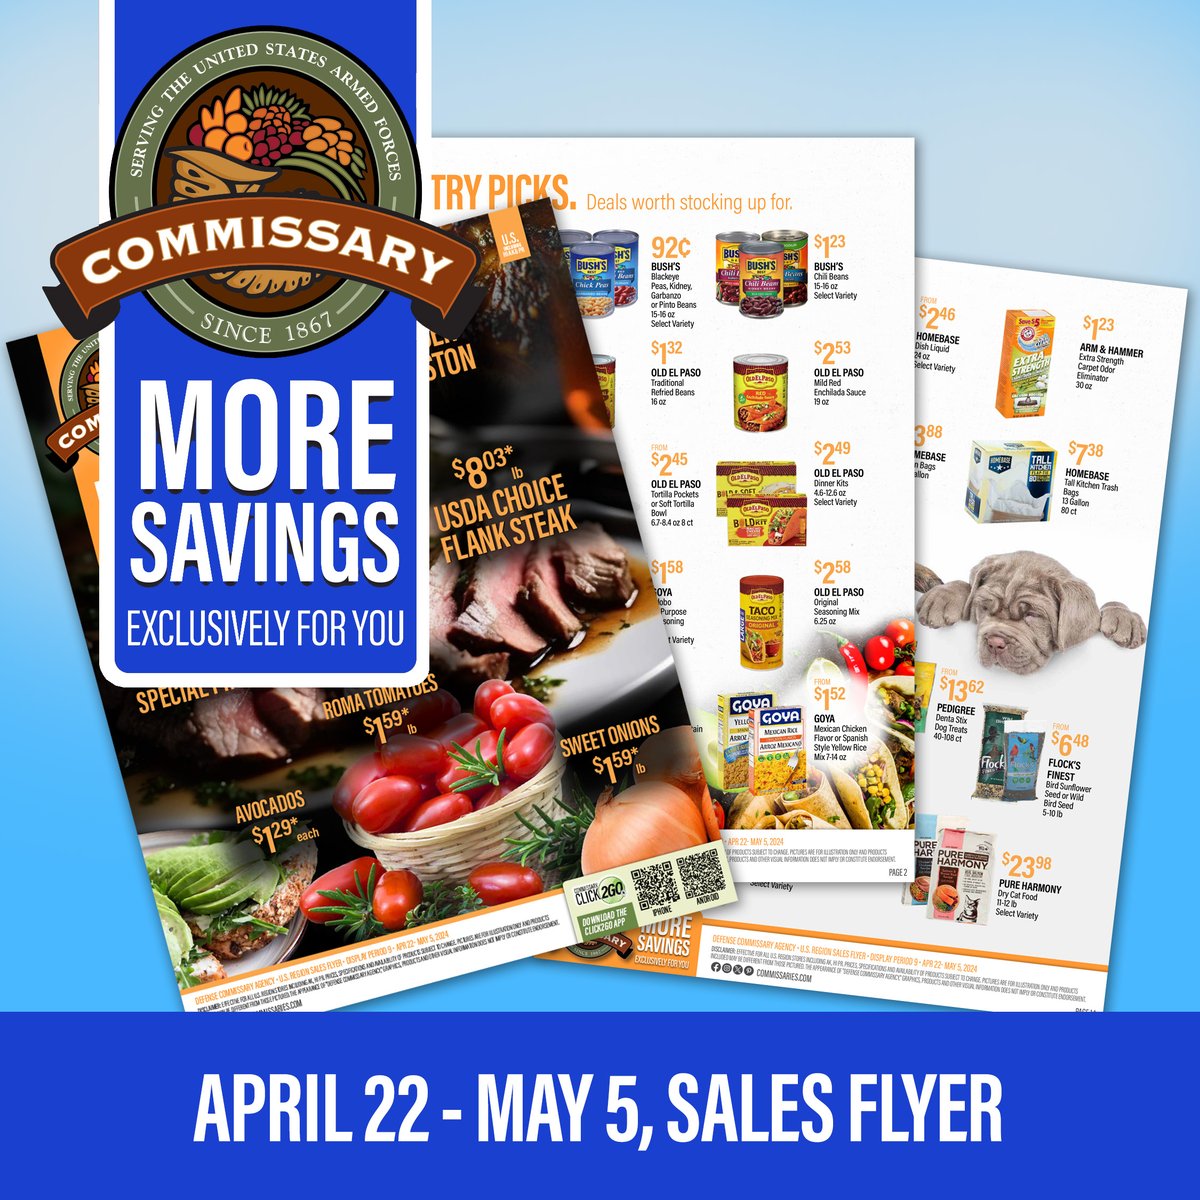 As the Month of the Military Child comes to a close, our sales flyer for April 22 - May 5 has more savings exclusively for you and our nation’s youngest heroes: corp.commissaries.com/our-agency/new… #commissarysavings #milfam #milso